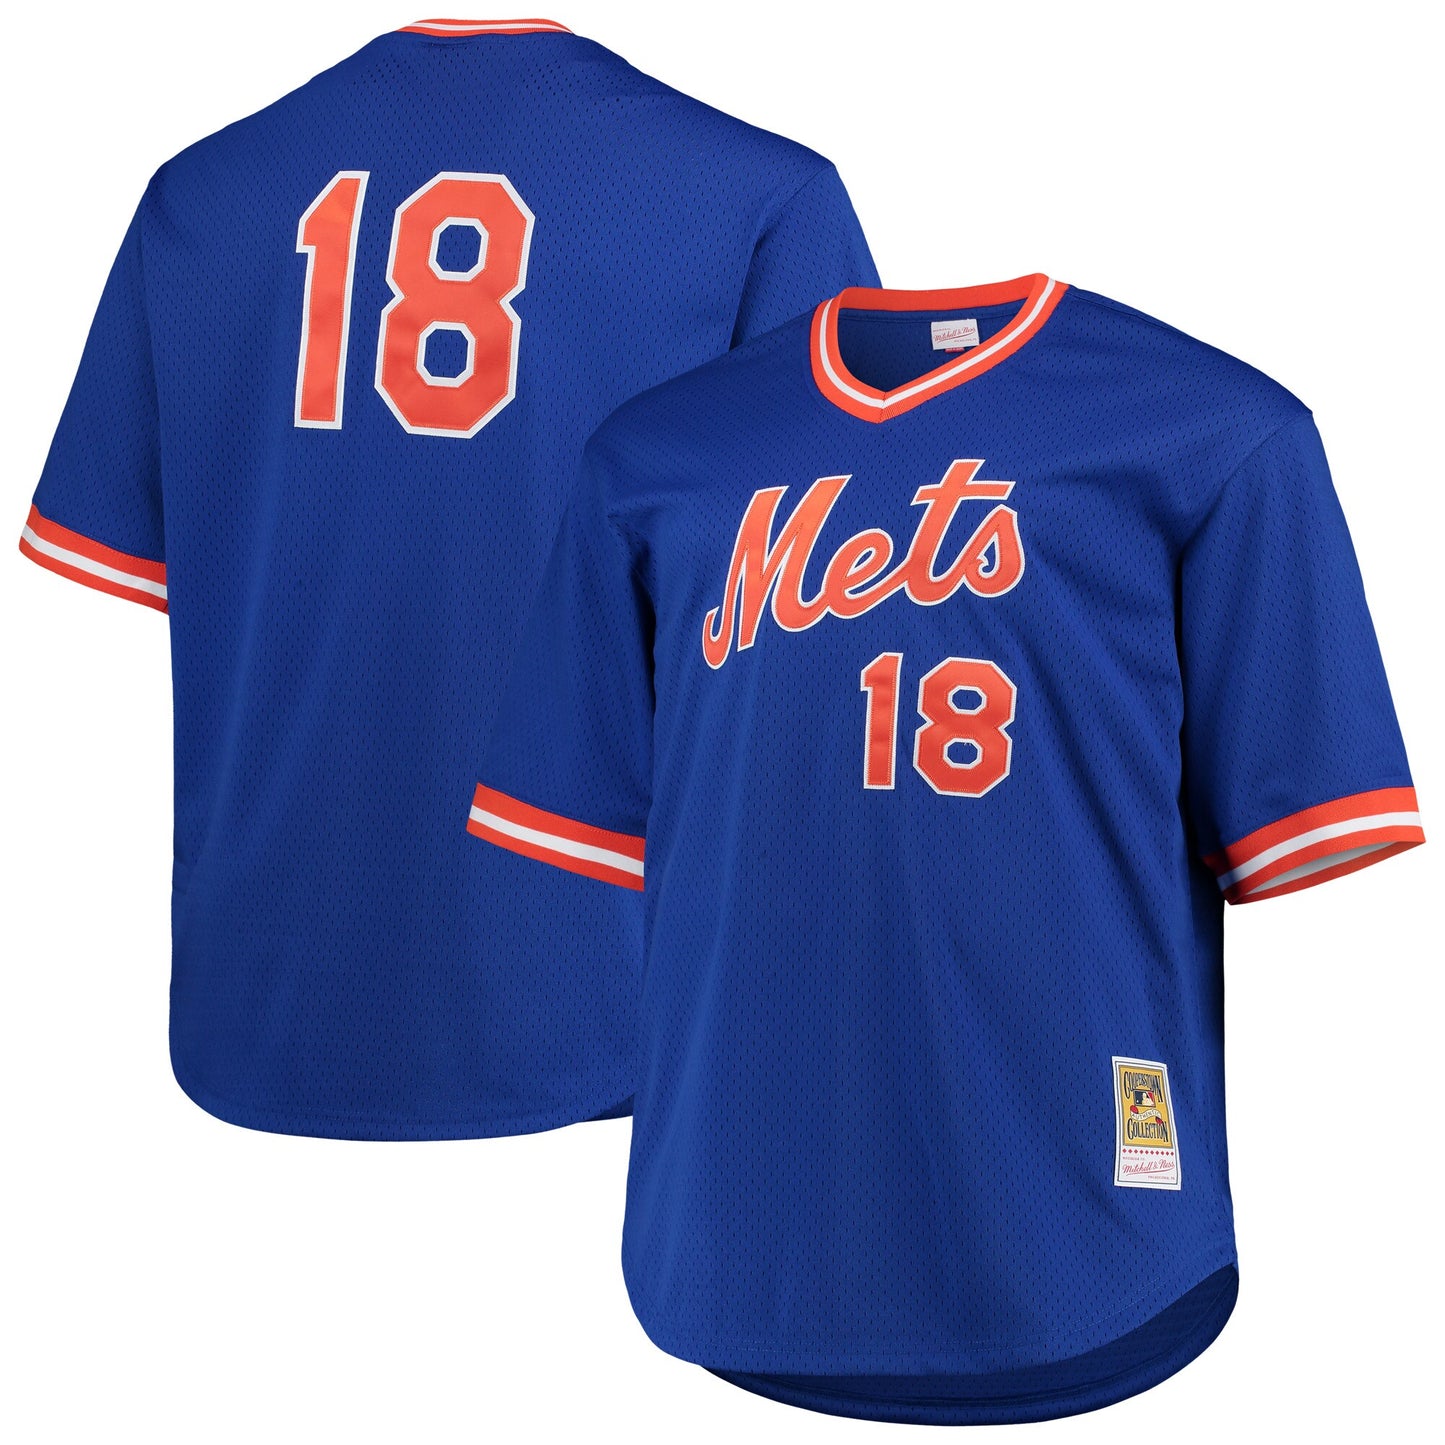 Darryl Strawberry New York Mets Mitchell & Ness Big & Tall Cooperstown Collection Mesh Batting Practice Jersey - Royal